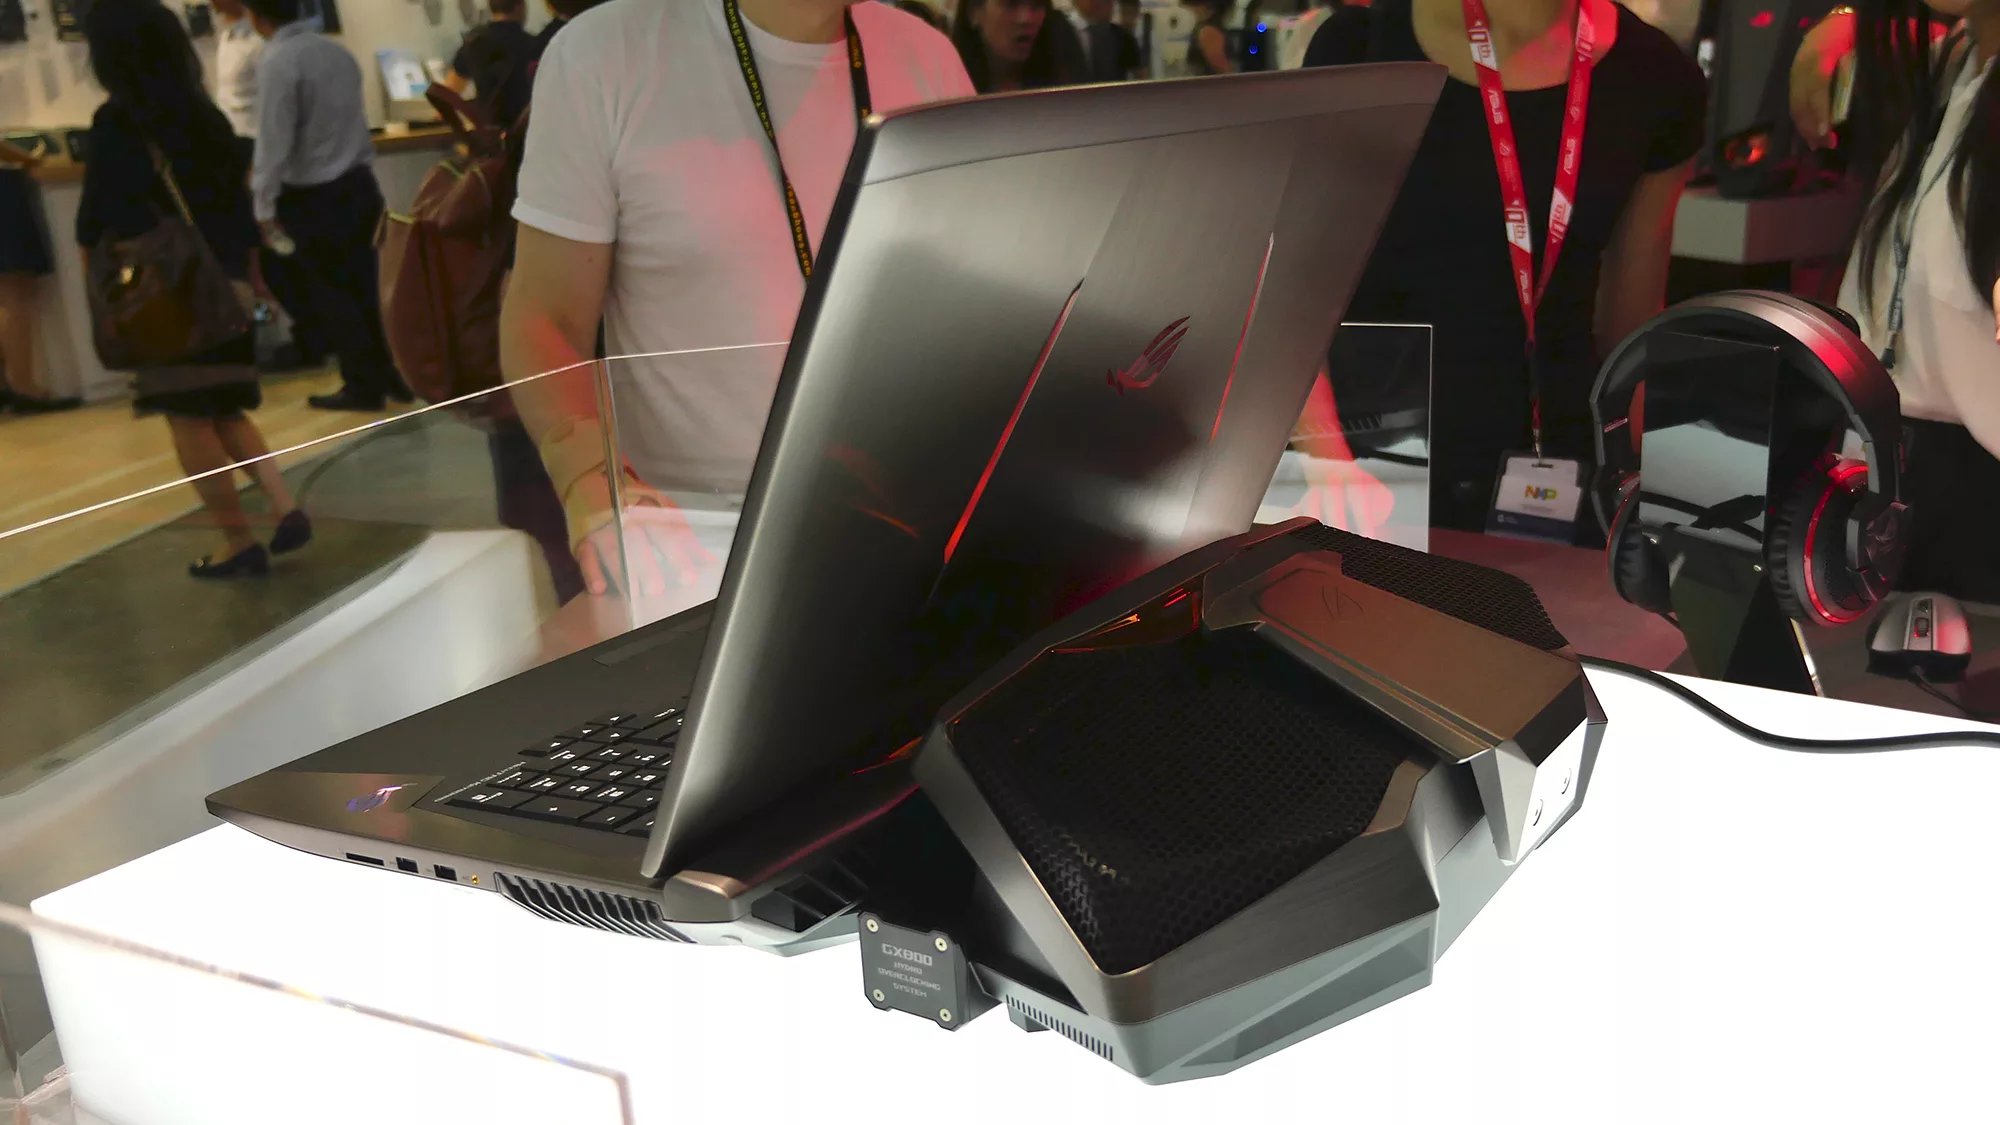 Coming Soon: The New King - ROG GX800 Liquid-Cooled Gaming Laptop | ROG - Republic  of Gamers Global